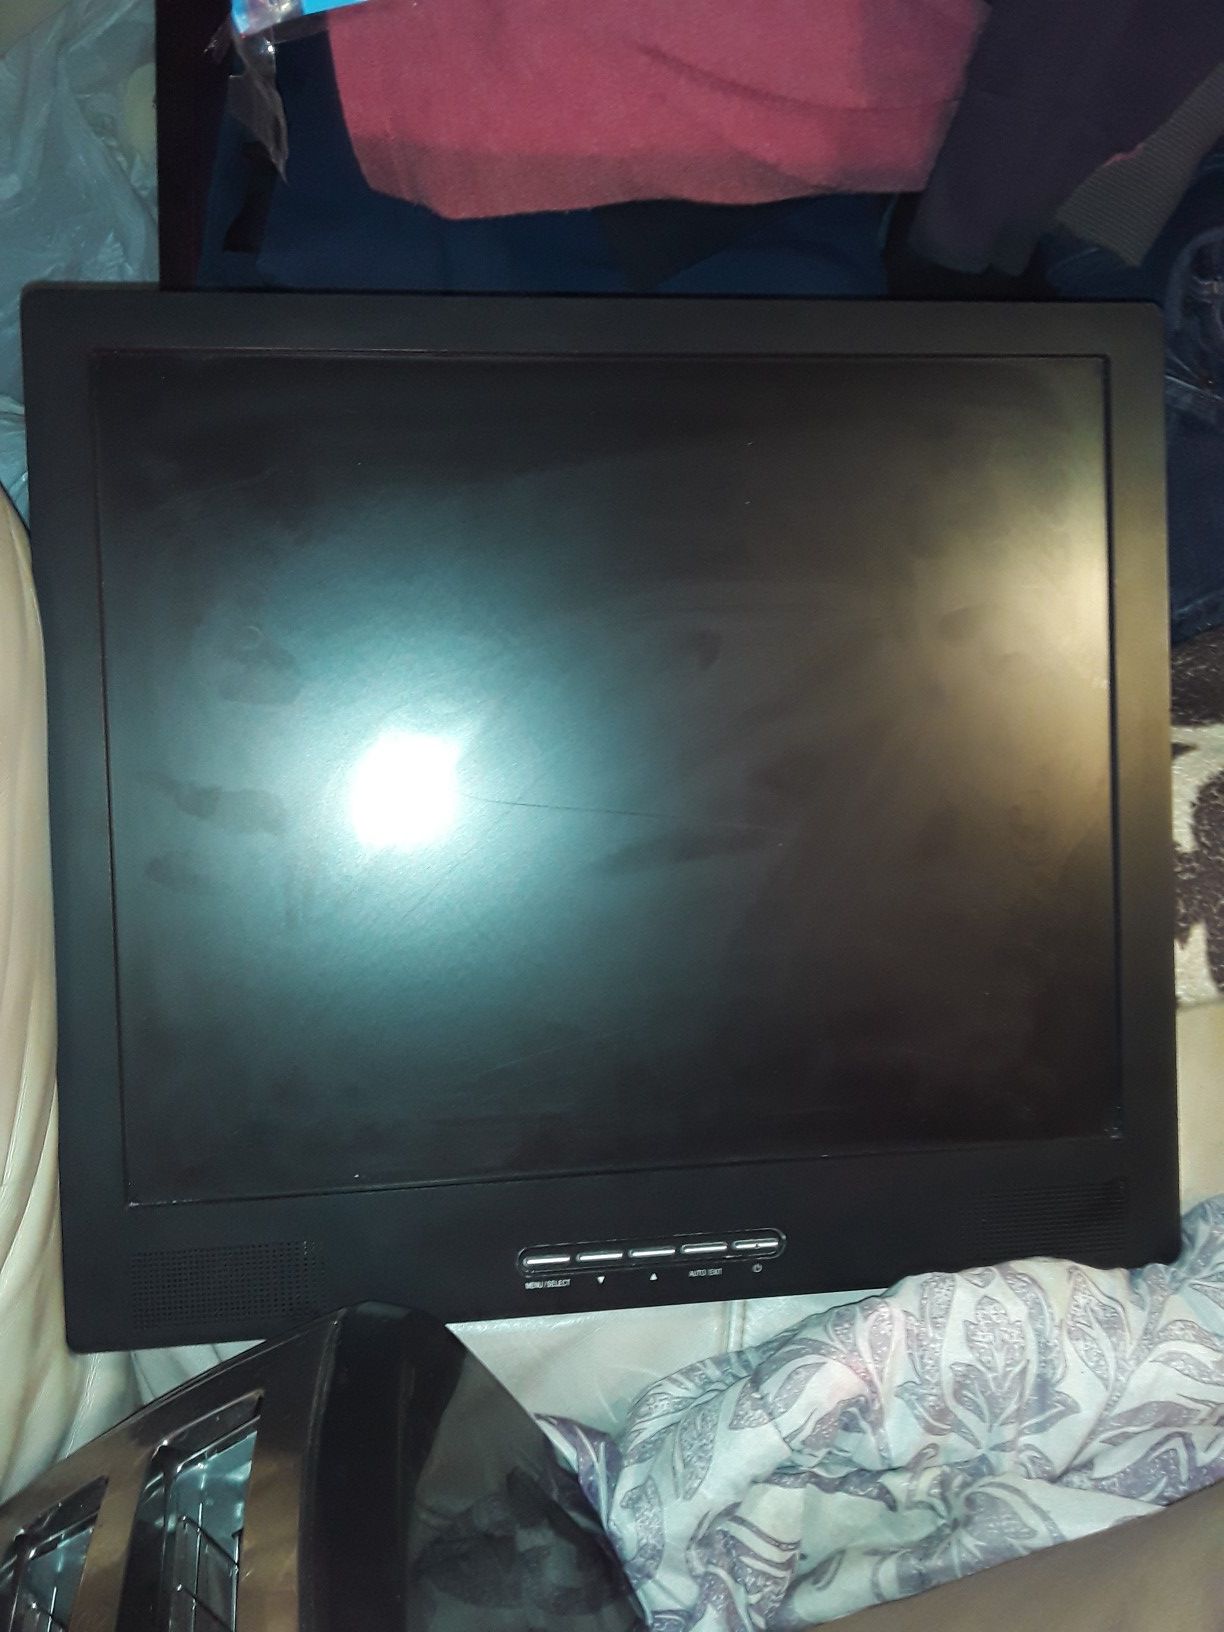 Clinton Electronics computer monitor 17"×15" in good working condition